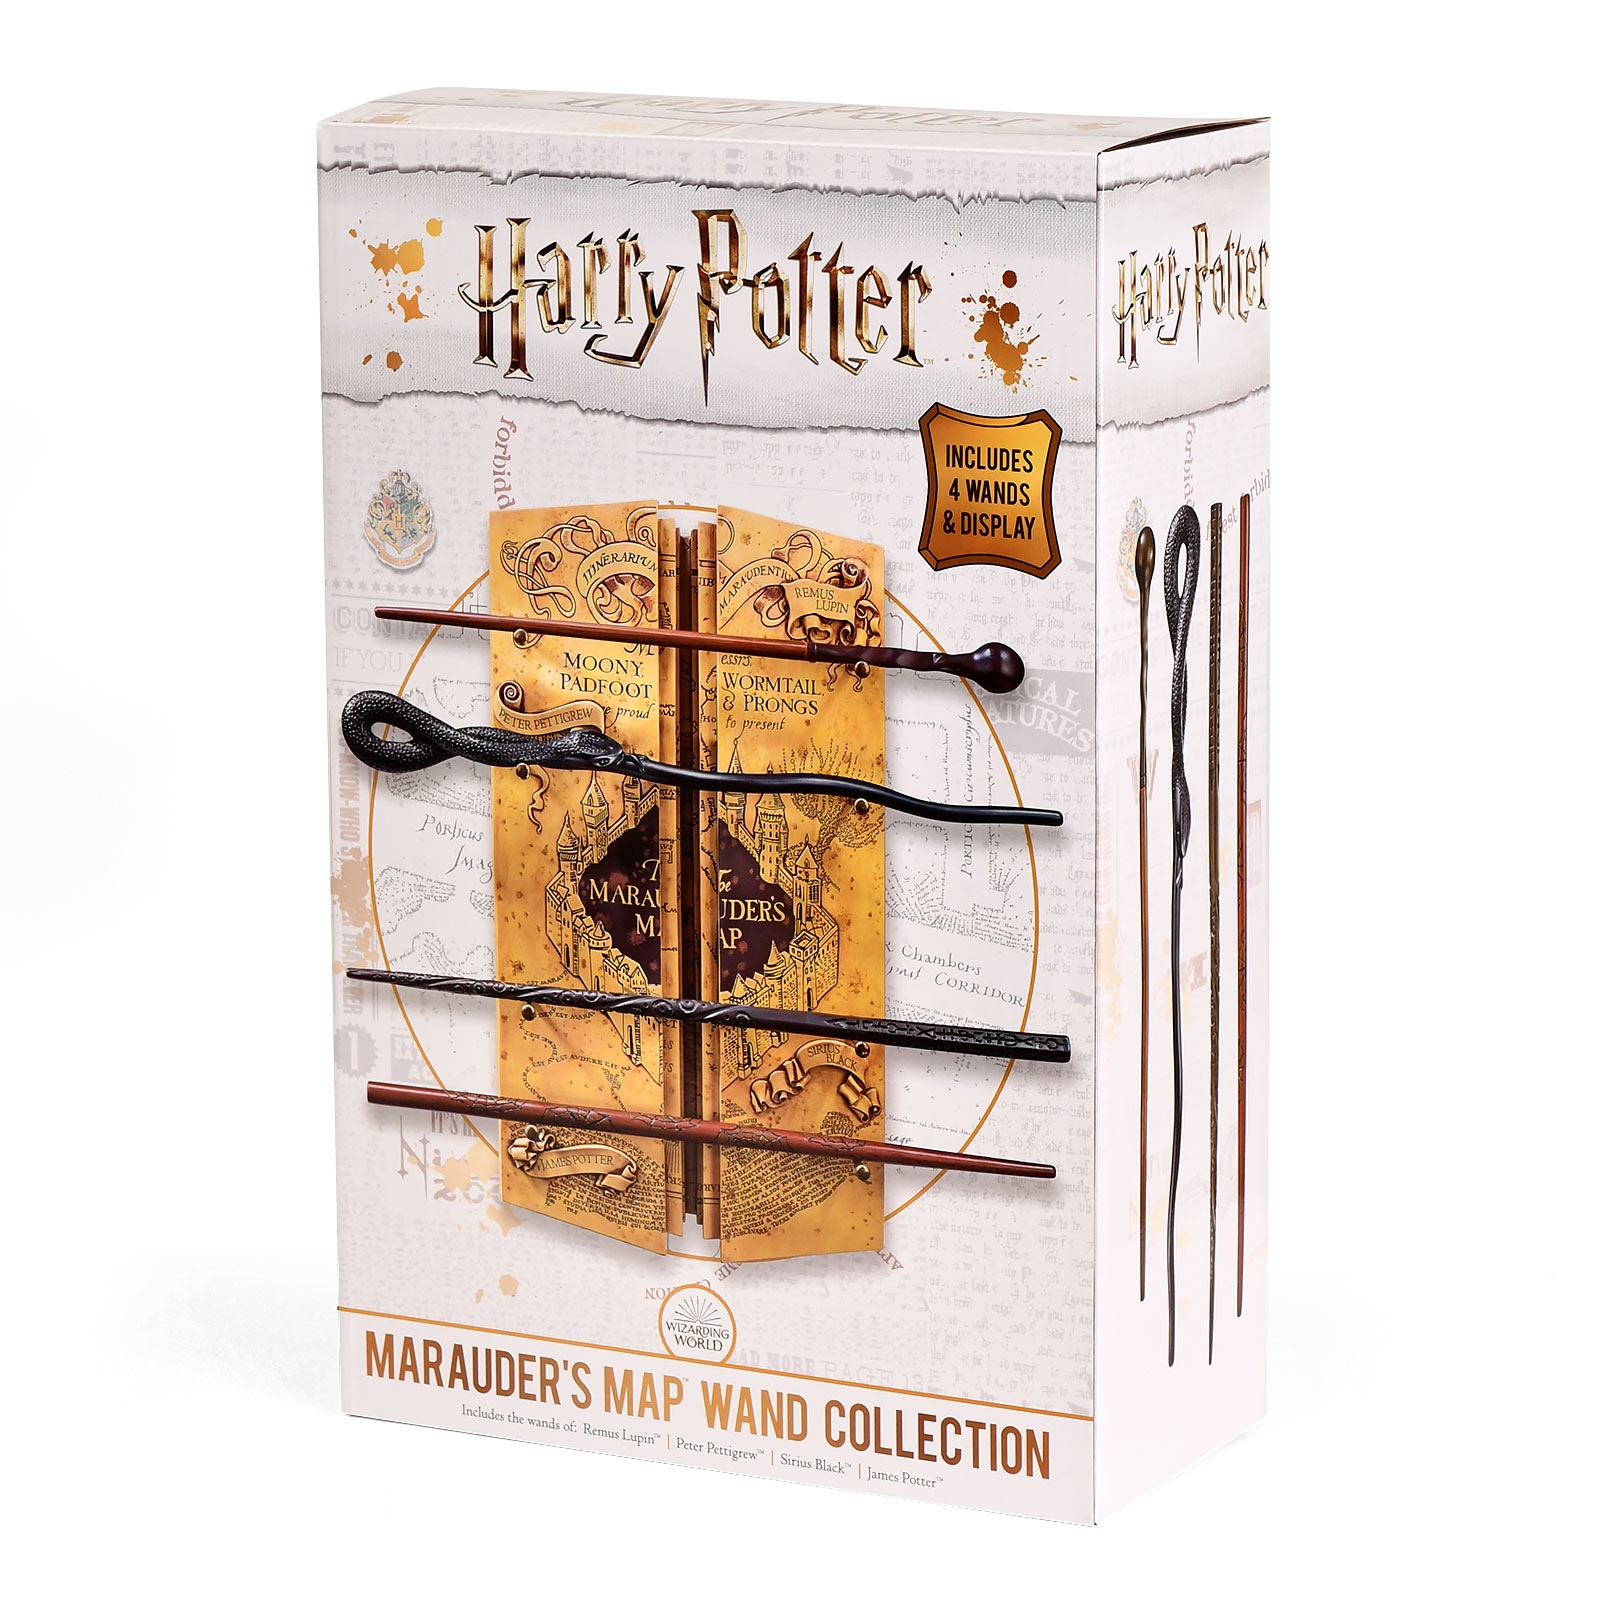 Harry Potter - Marauder's Map Wand Collection